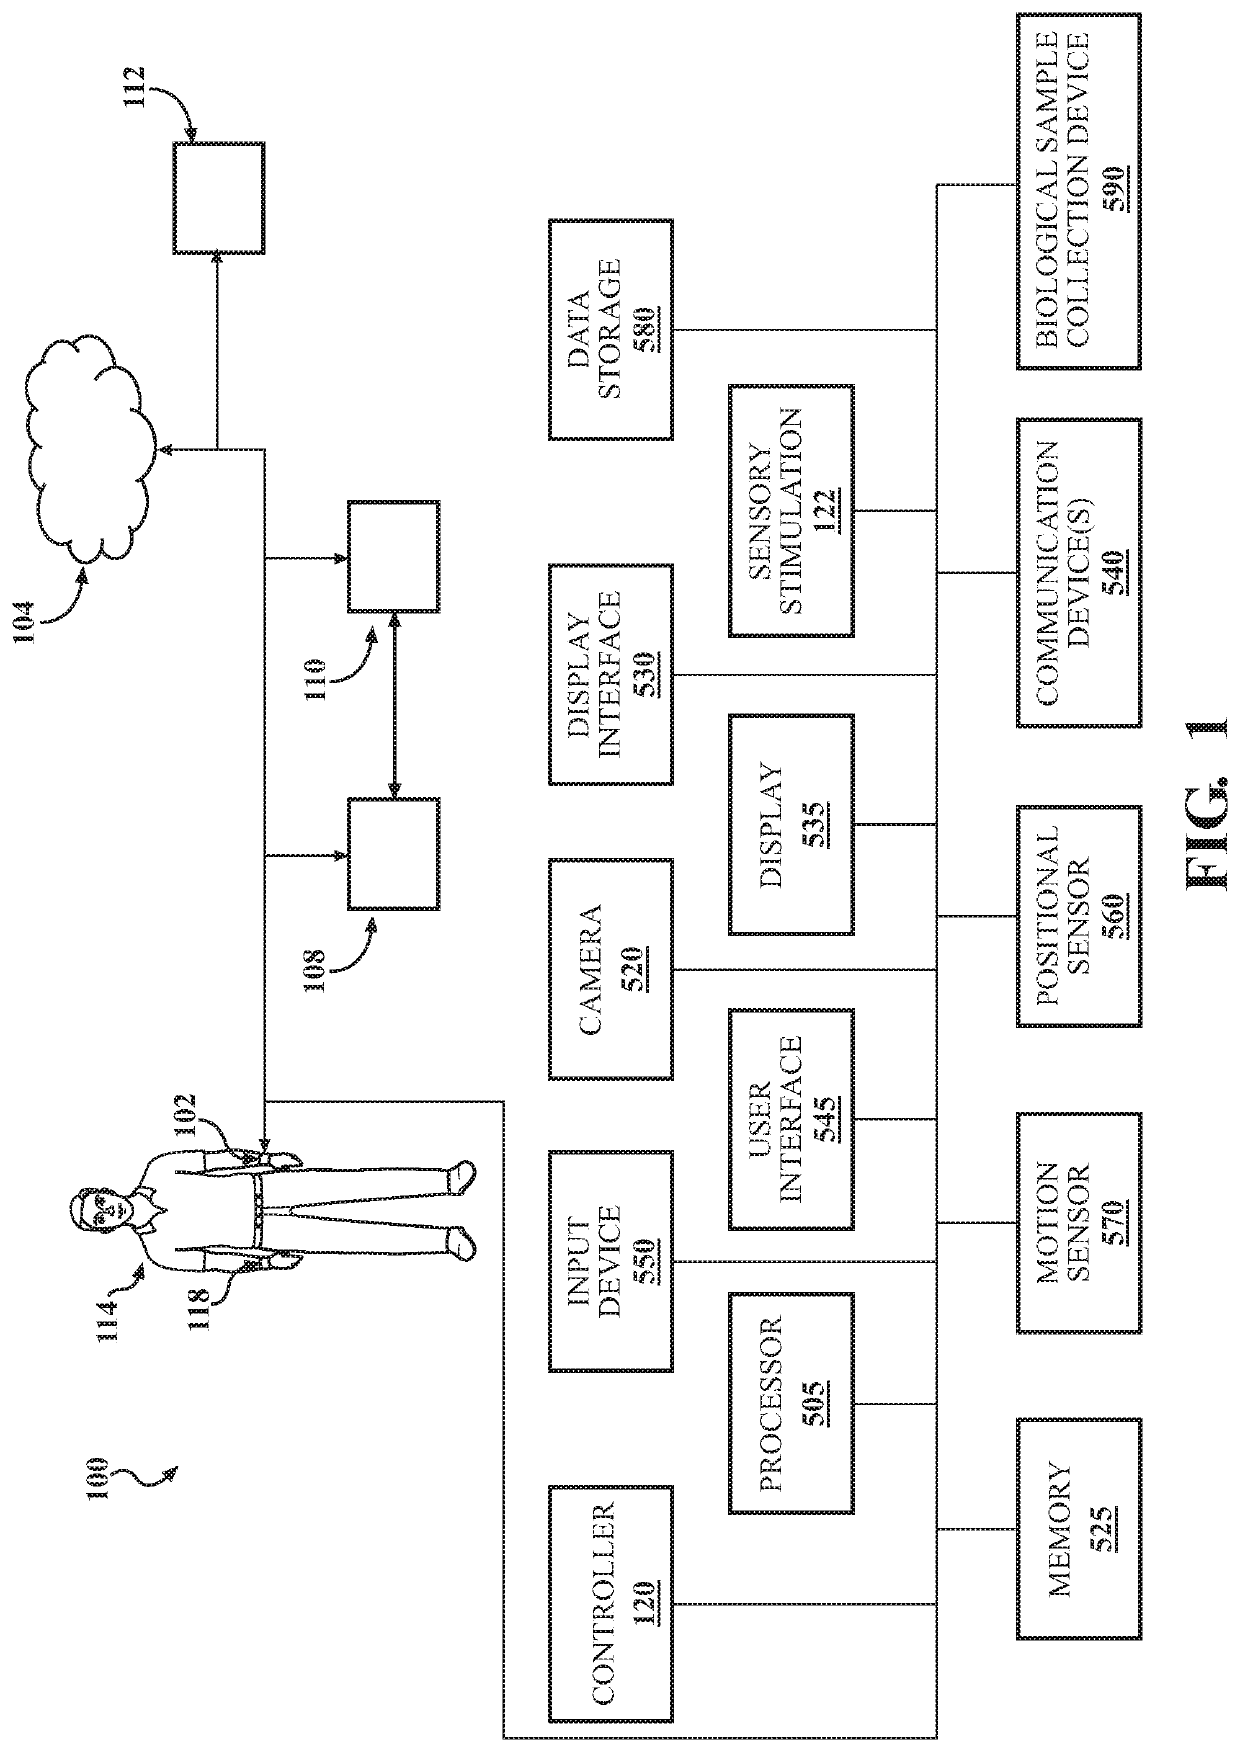 Systems and methods of wave generation for transcutaneous vibration